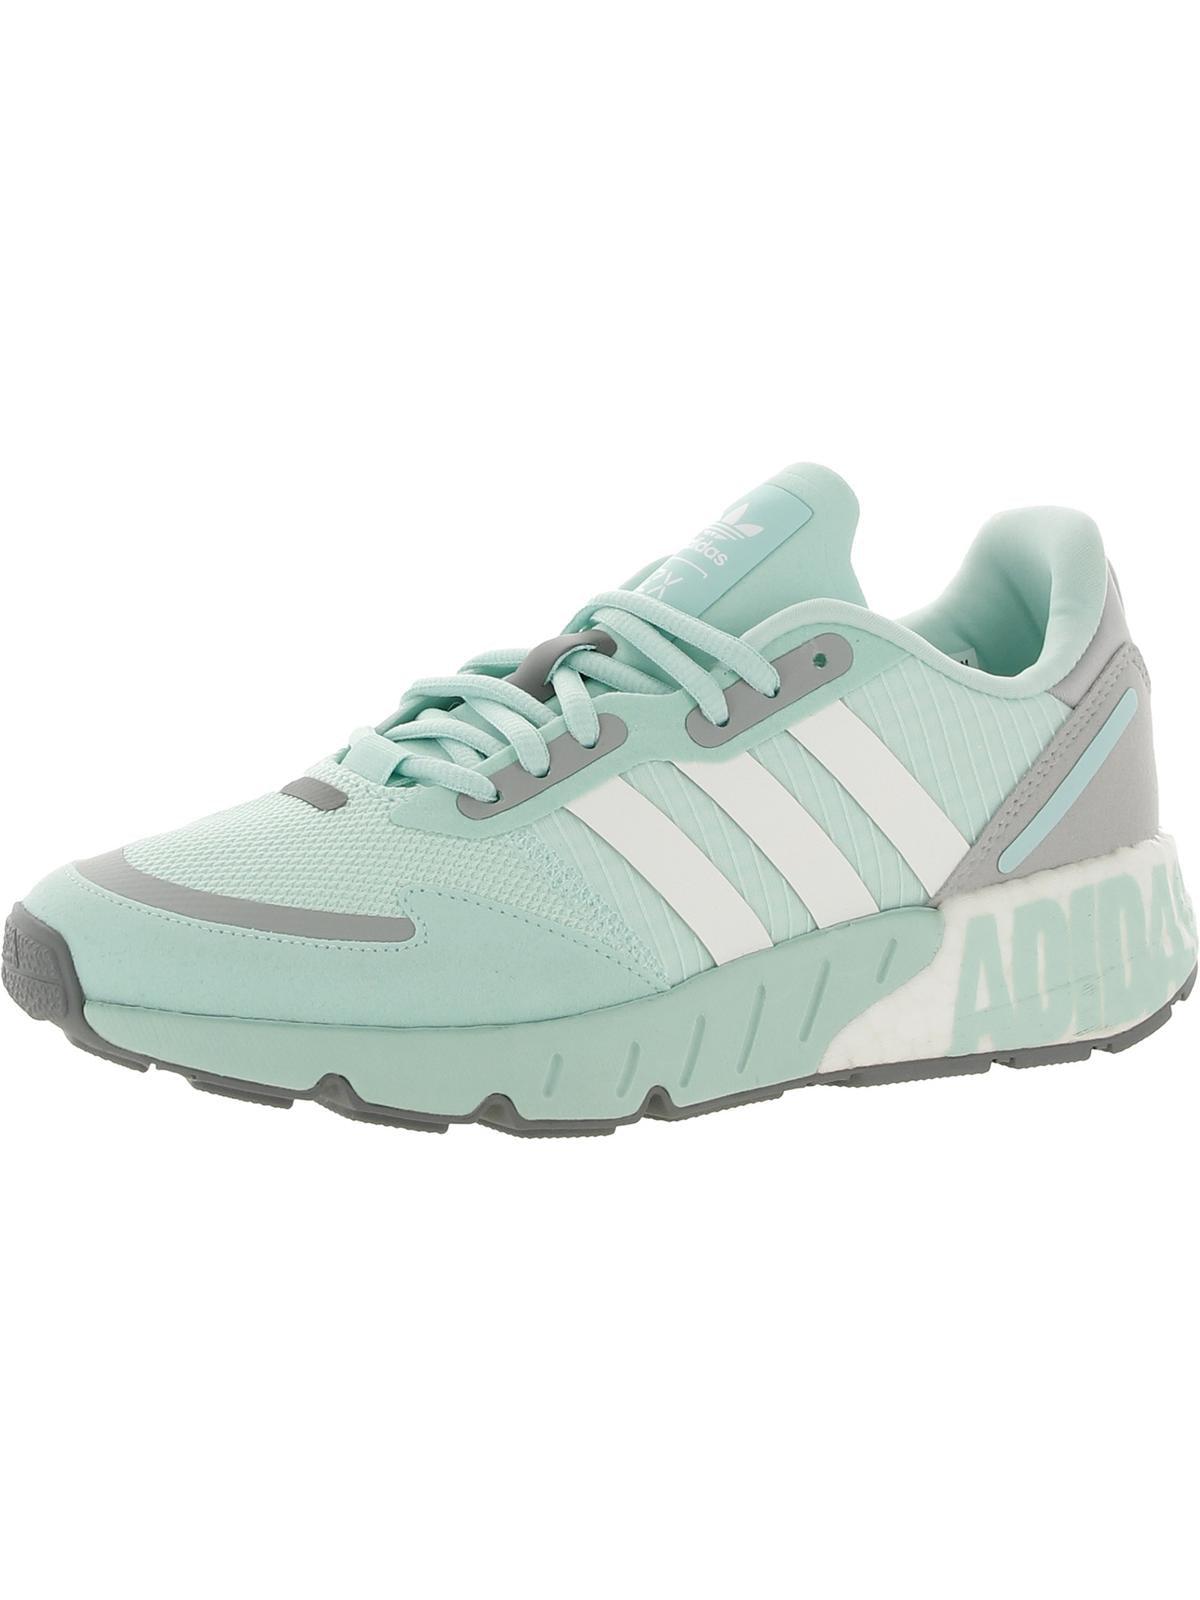 adidas Originals Zx 1k Boost Trainers Mesh Running Shoes in Green | Lyst